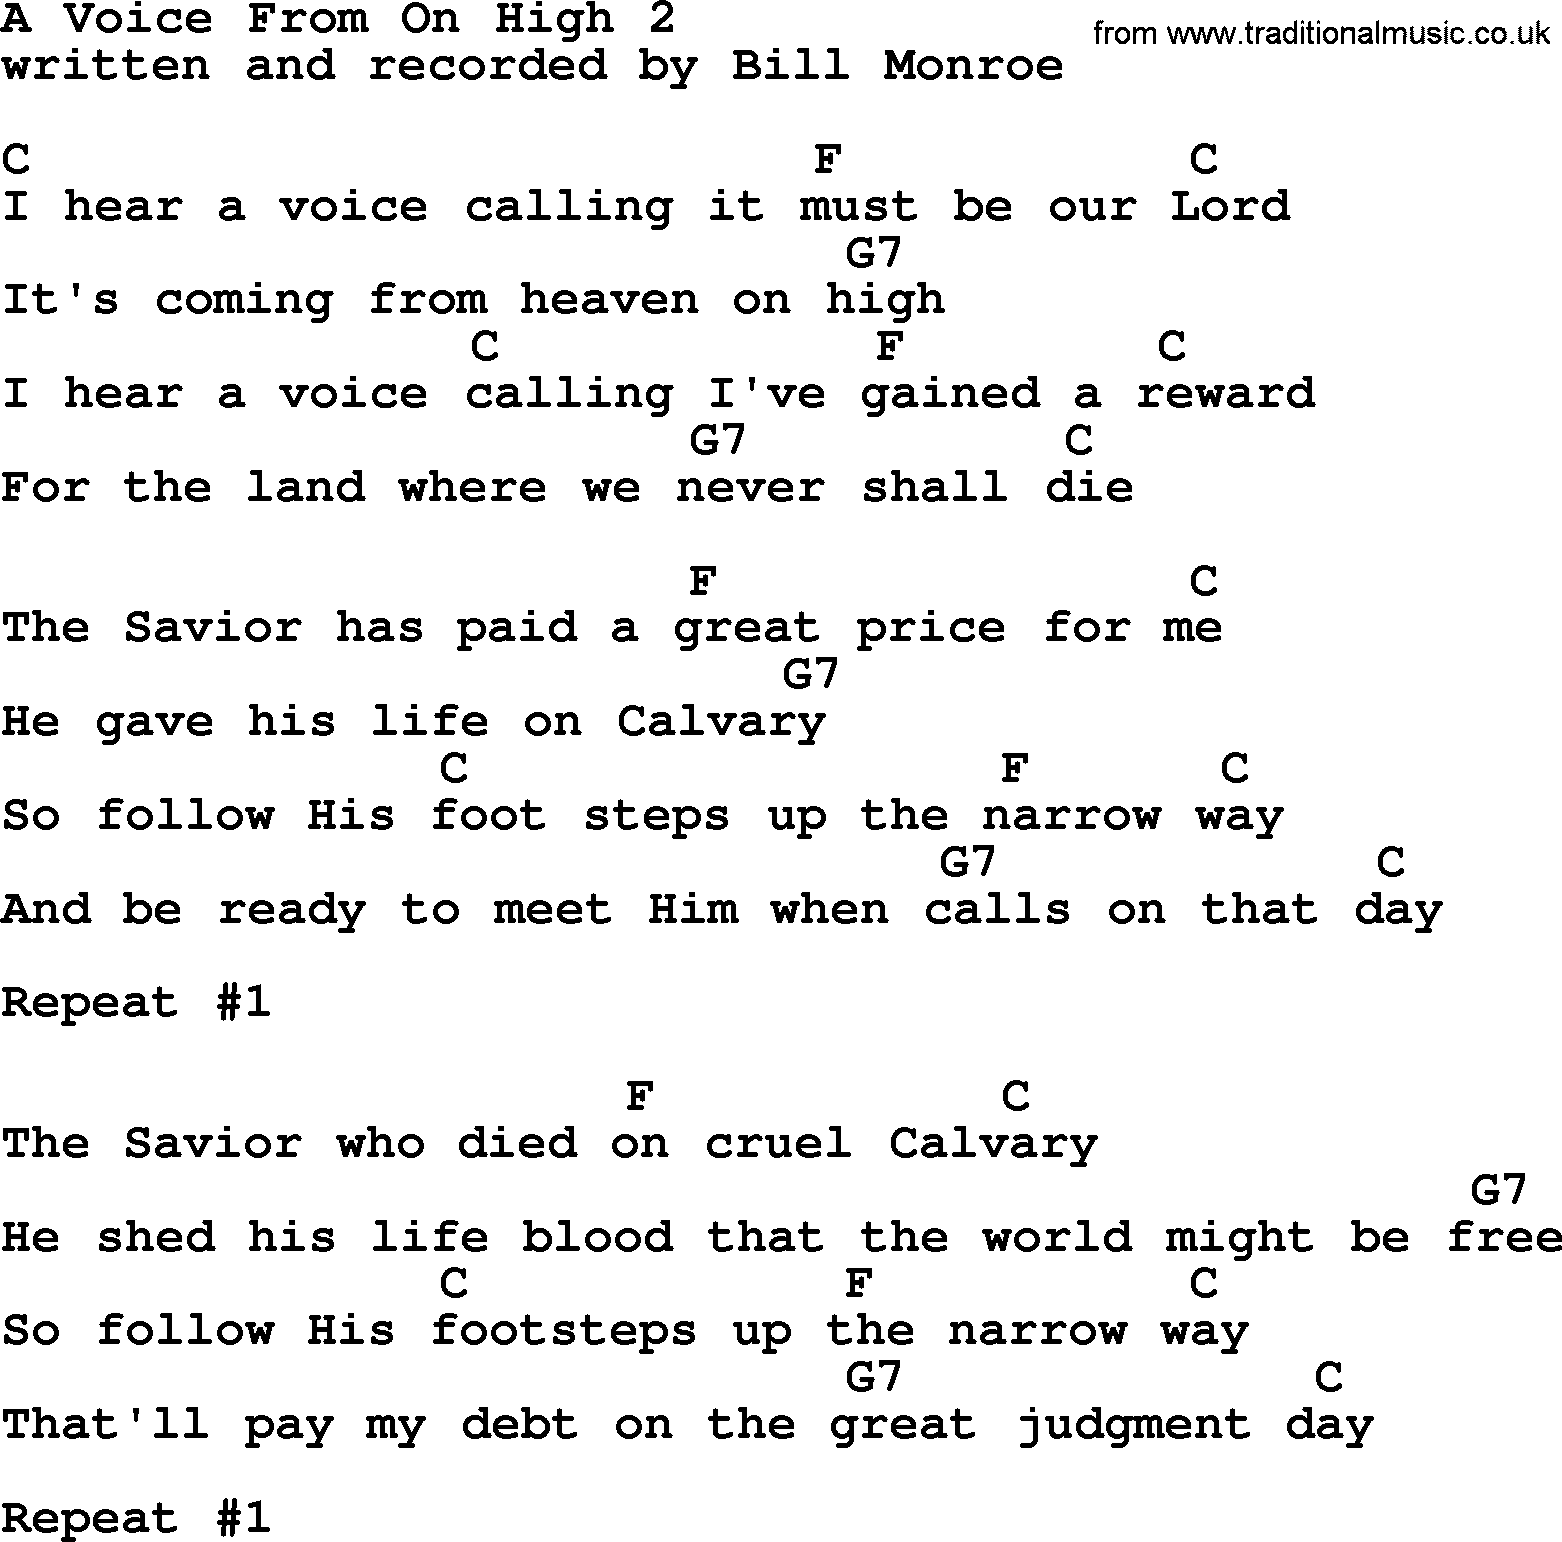 Bluegrass song: A Voice From On High 2, lyrics and chords